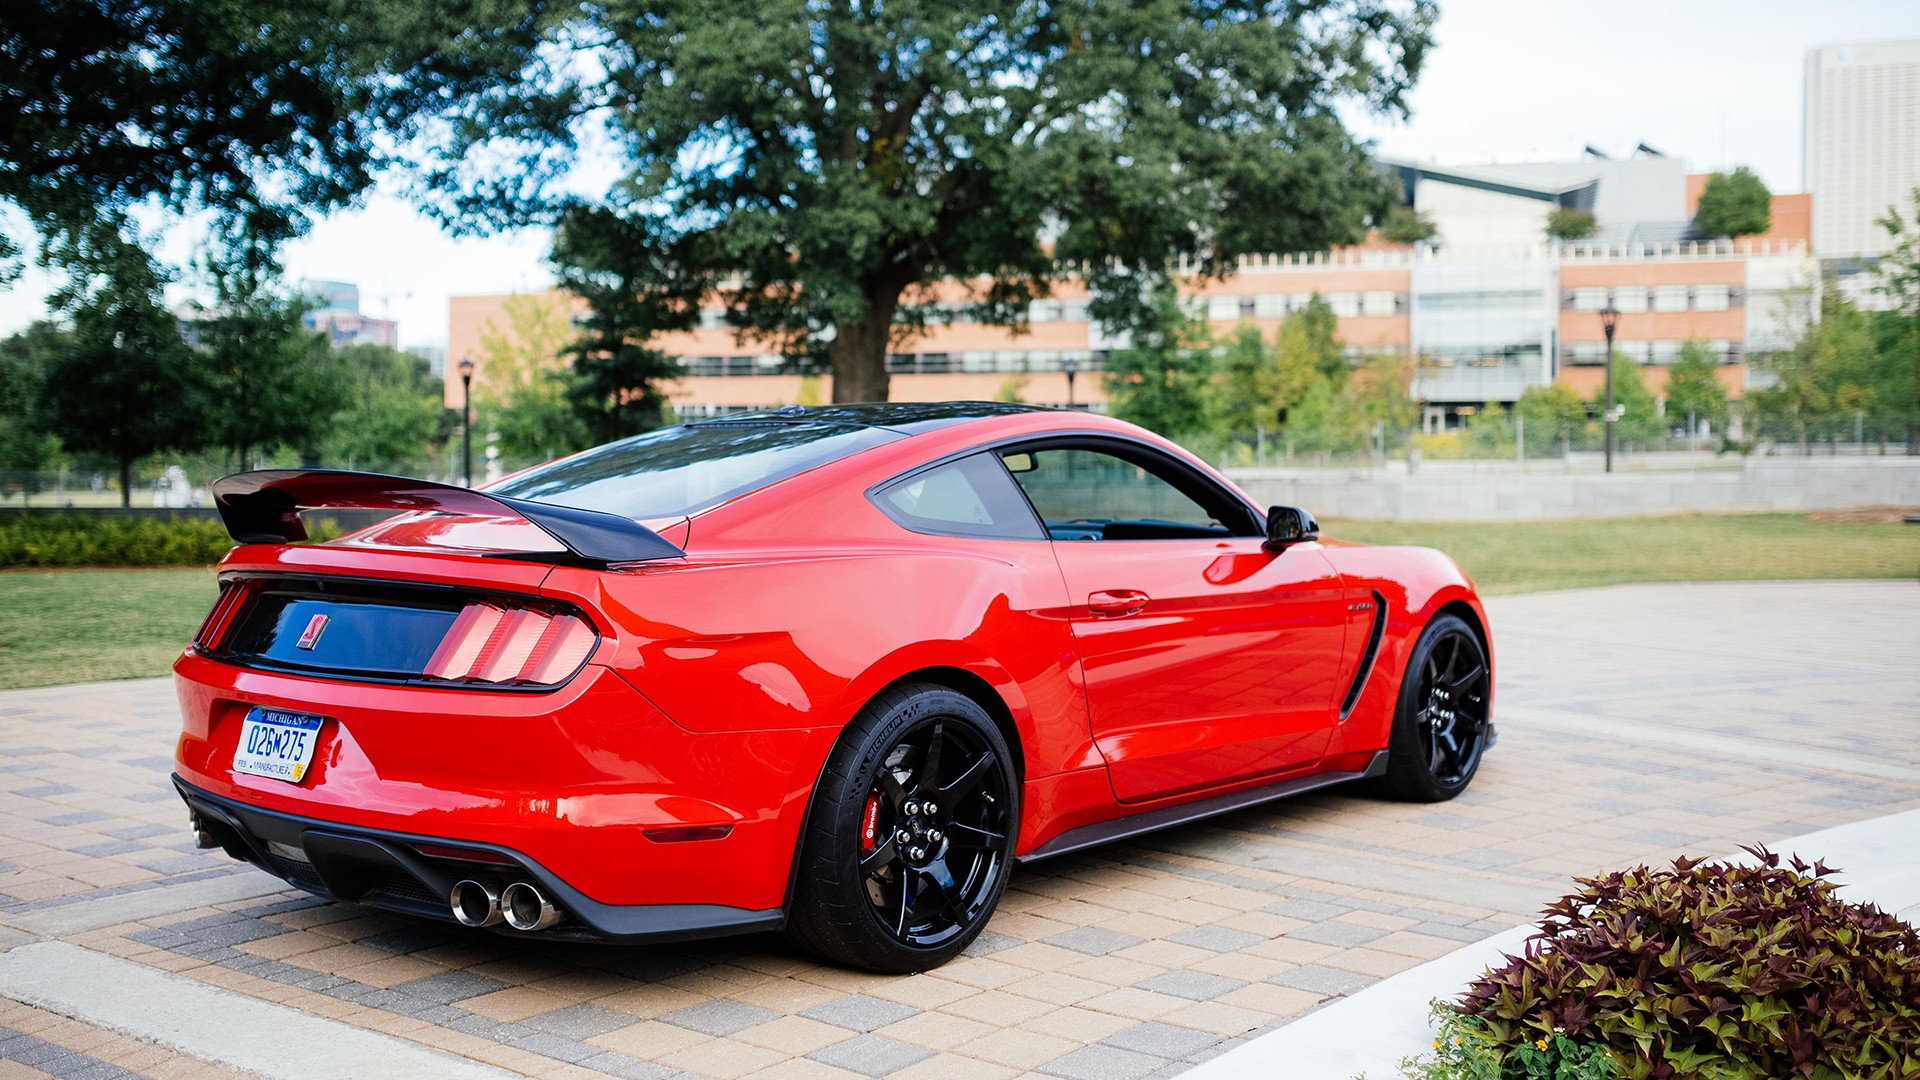 Car Ford Ford Mustang Shelby Gt350 Muscle Car Red Car Sport Car Vehicle 1920x1080